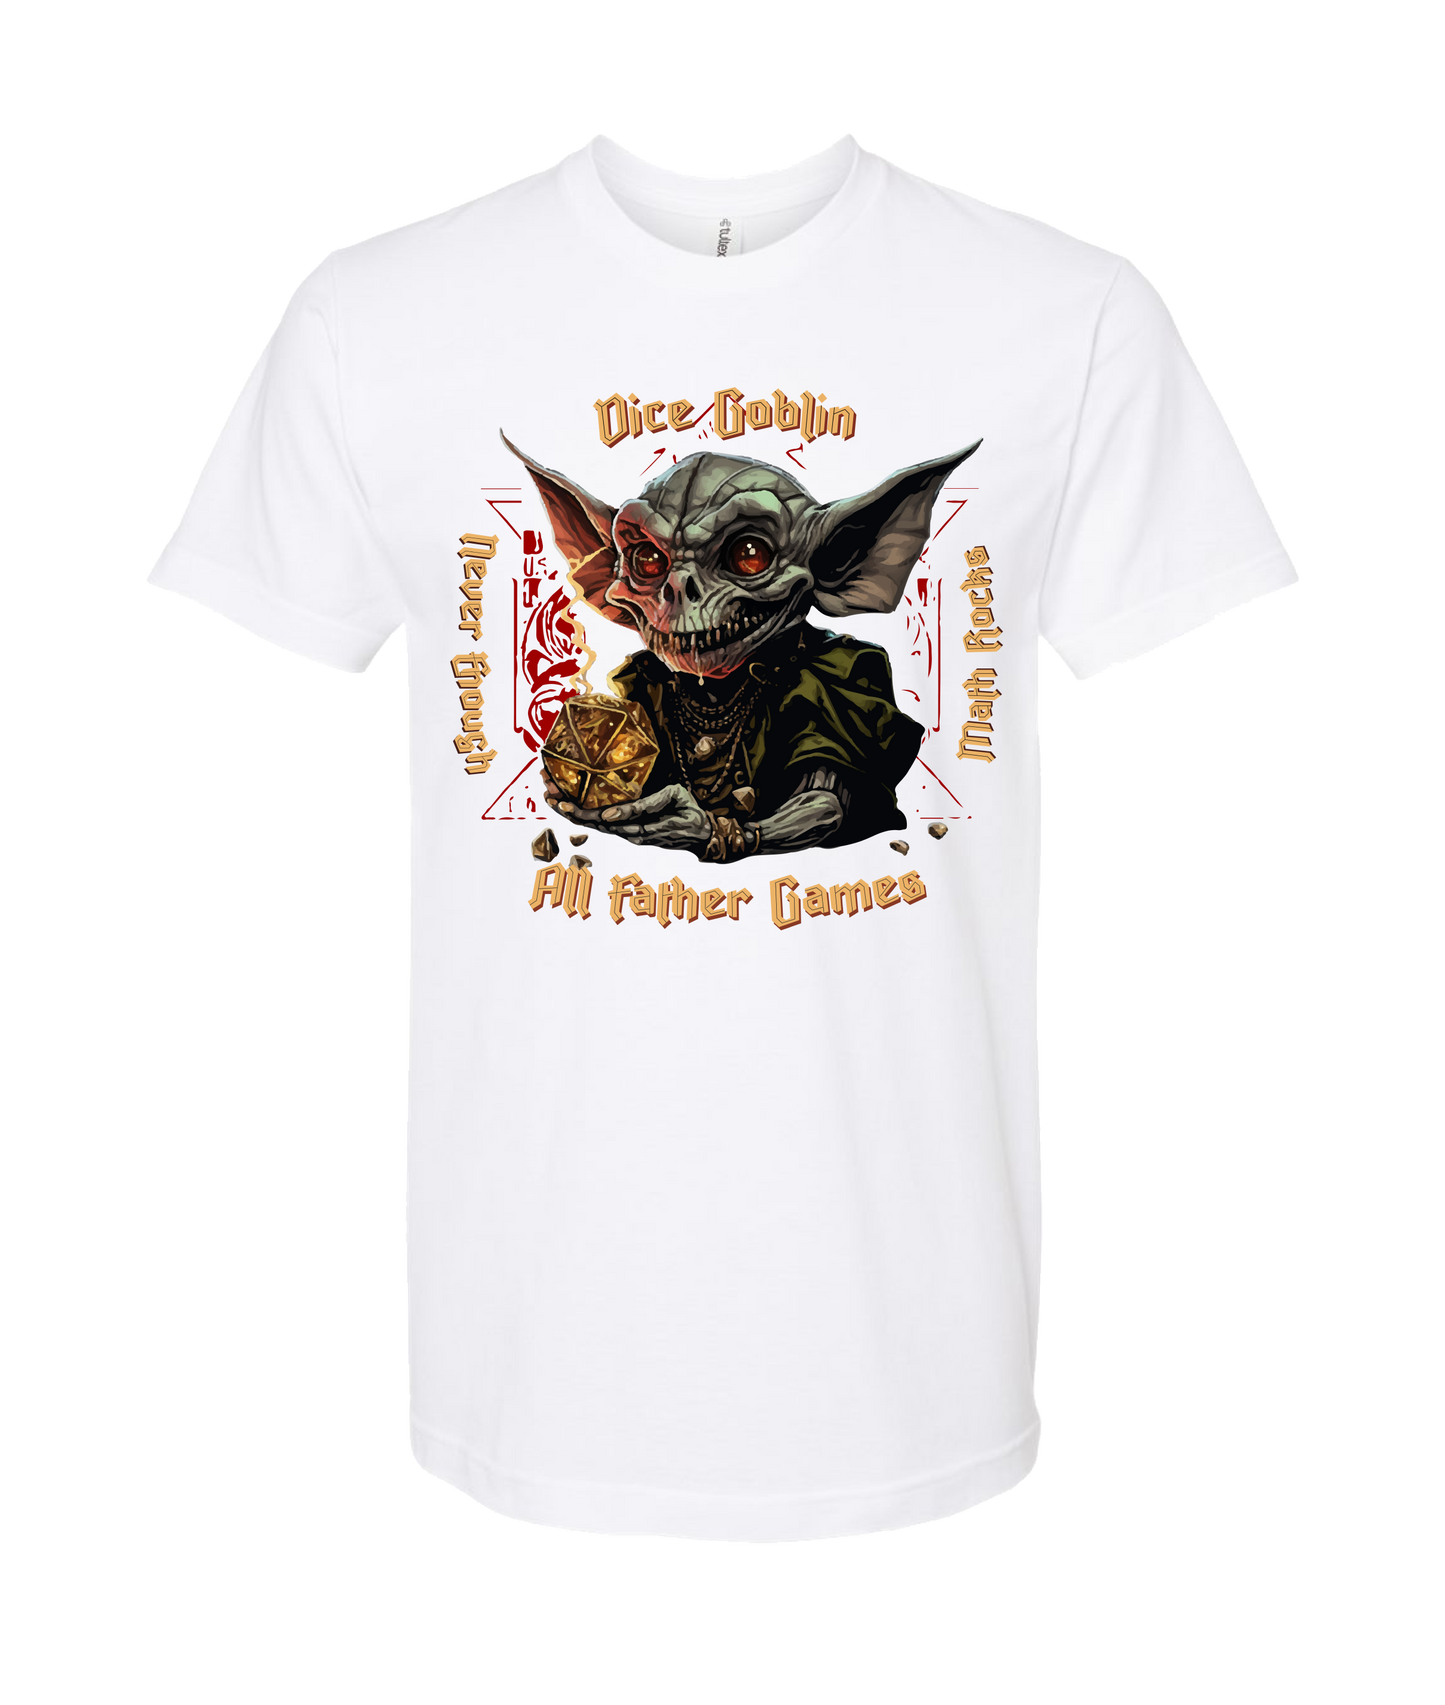 All Father Games - DICE GOBLIN - White T-Shirt